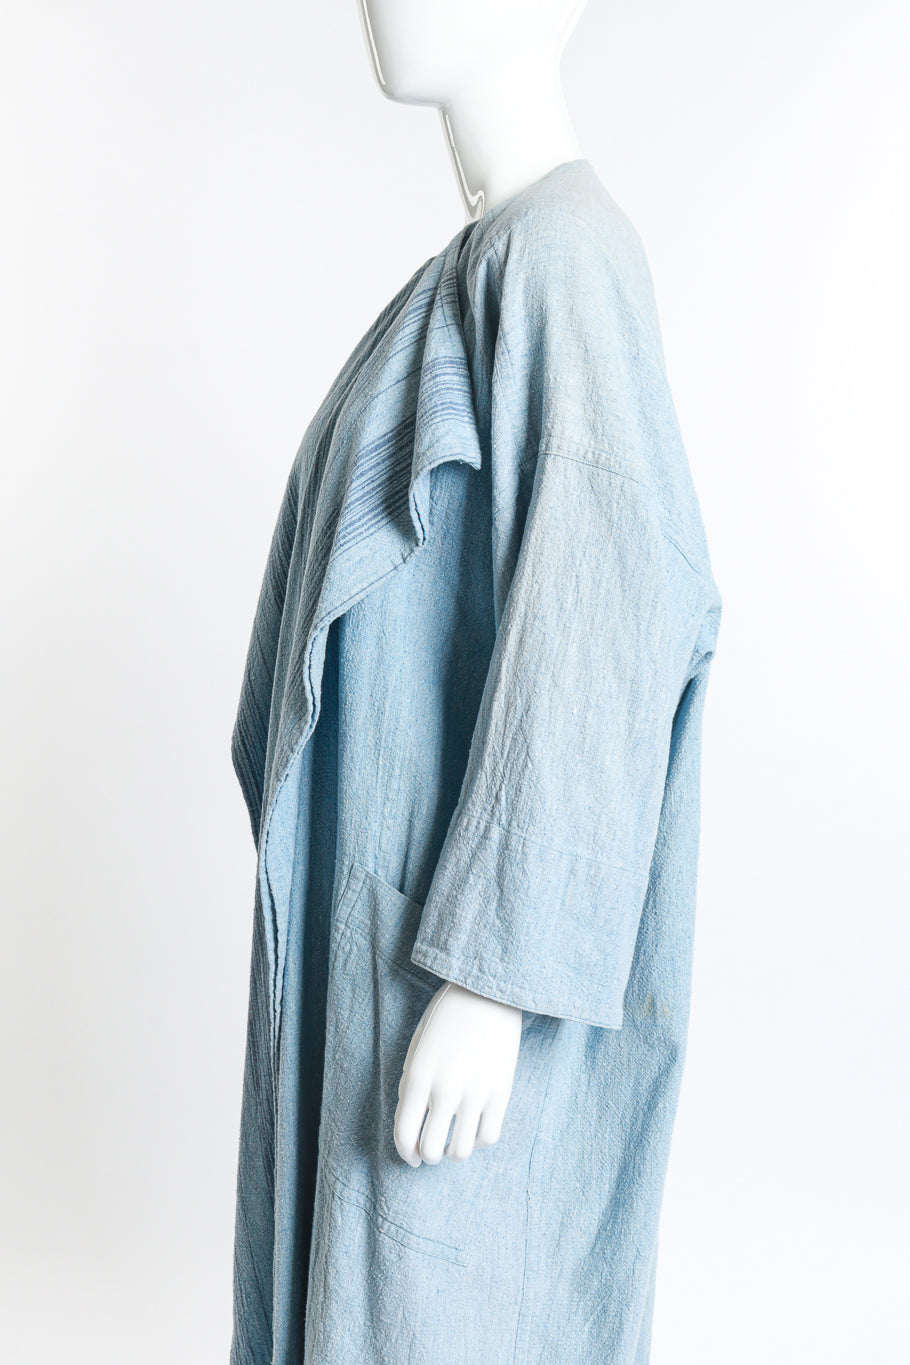 Vintage Issey Miyake plantation raw cotton duster left side view as worn on mannequin @RECESS LA